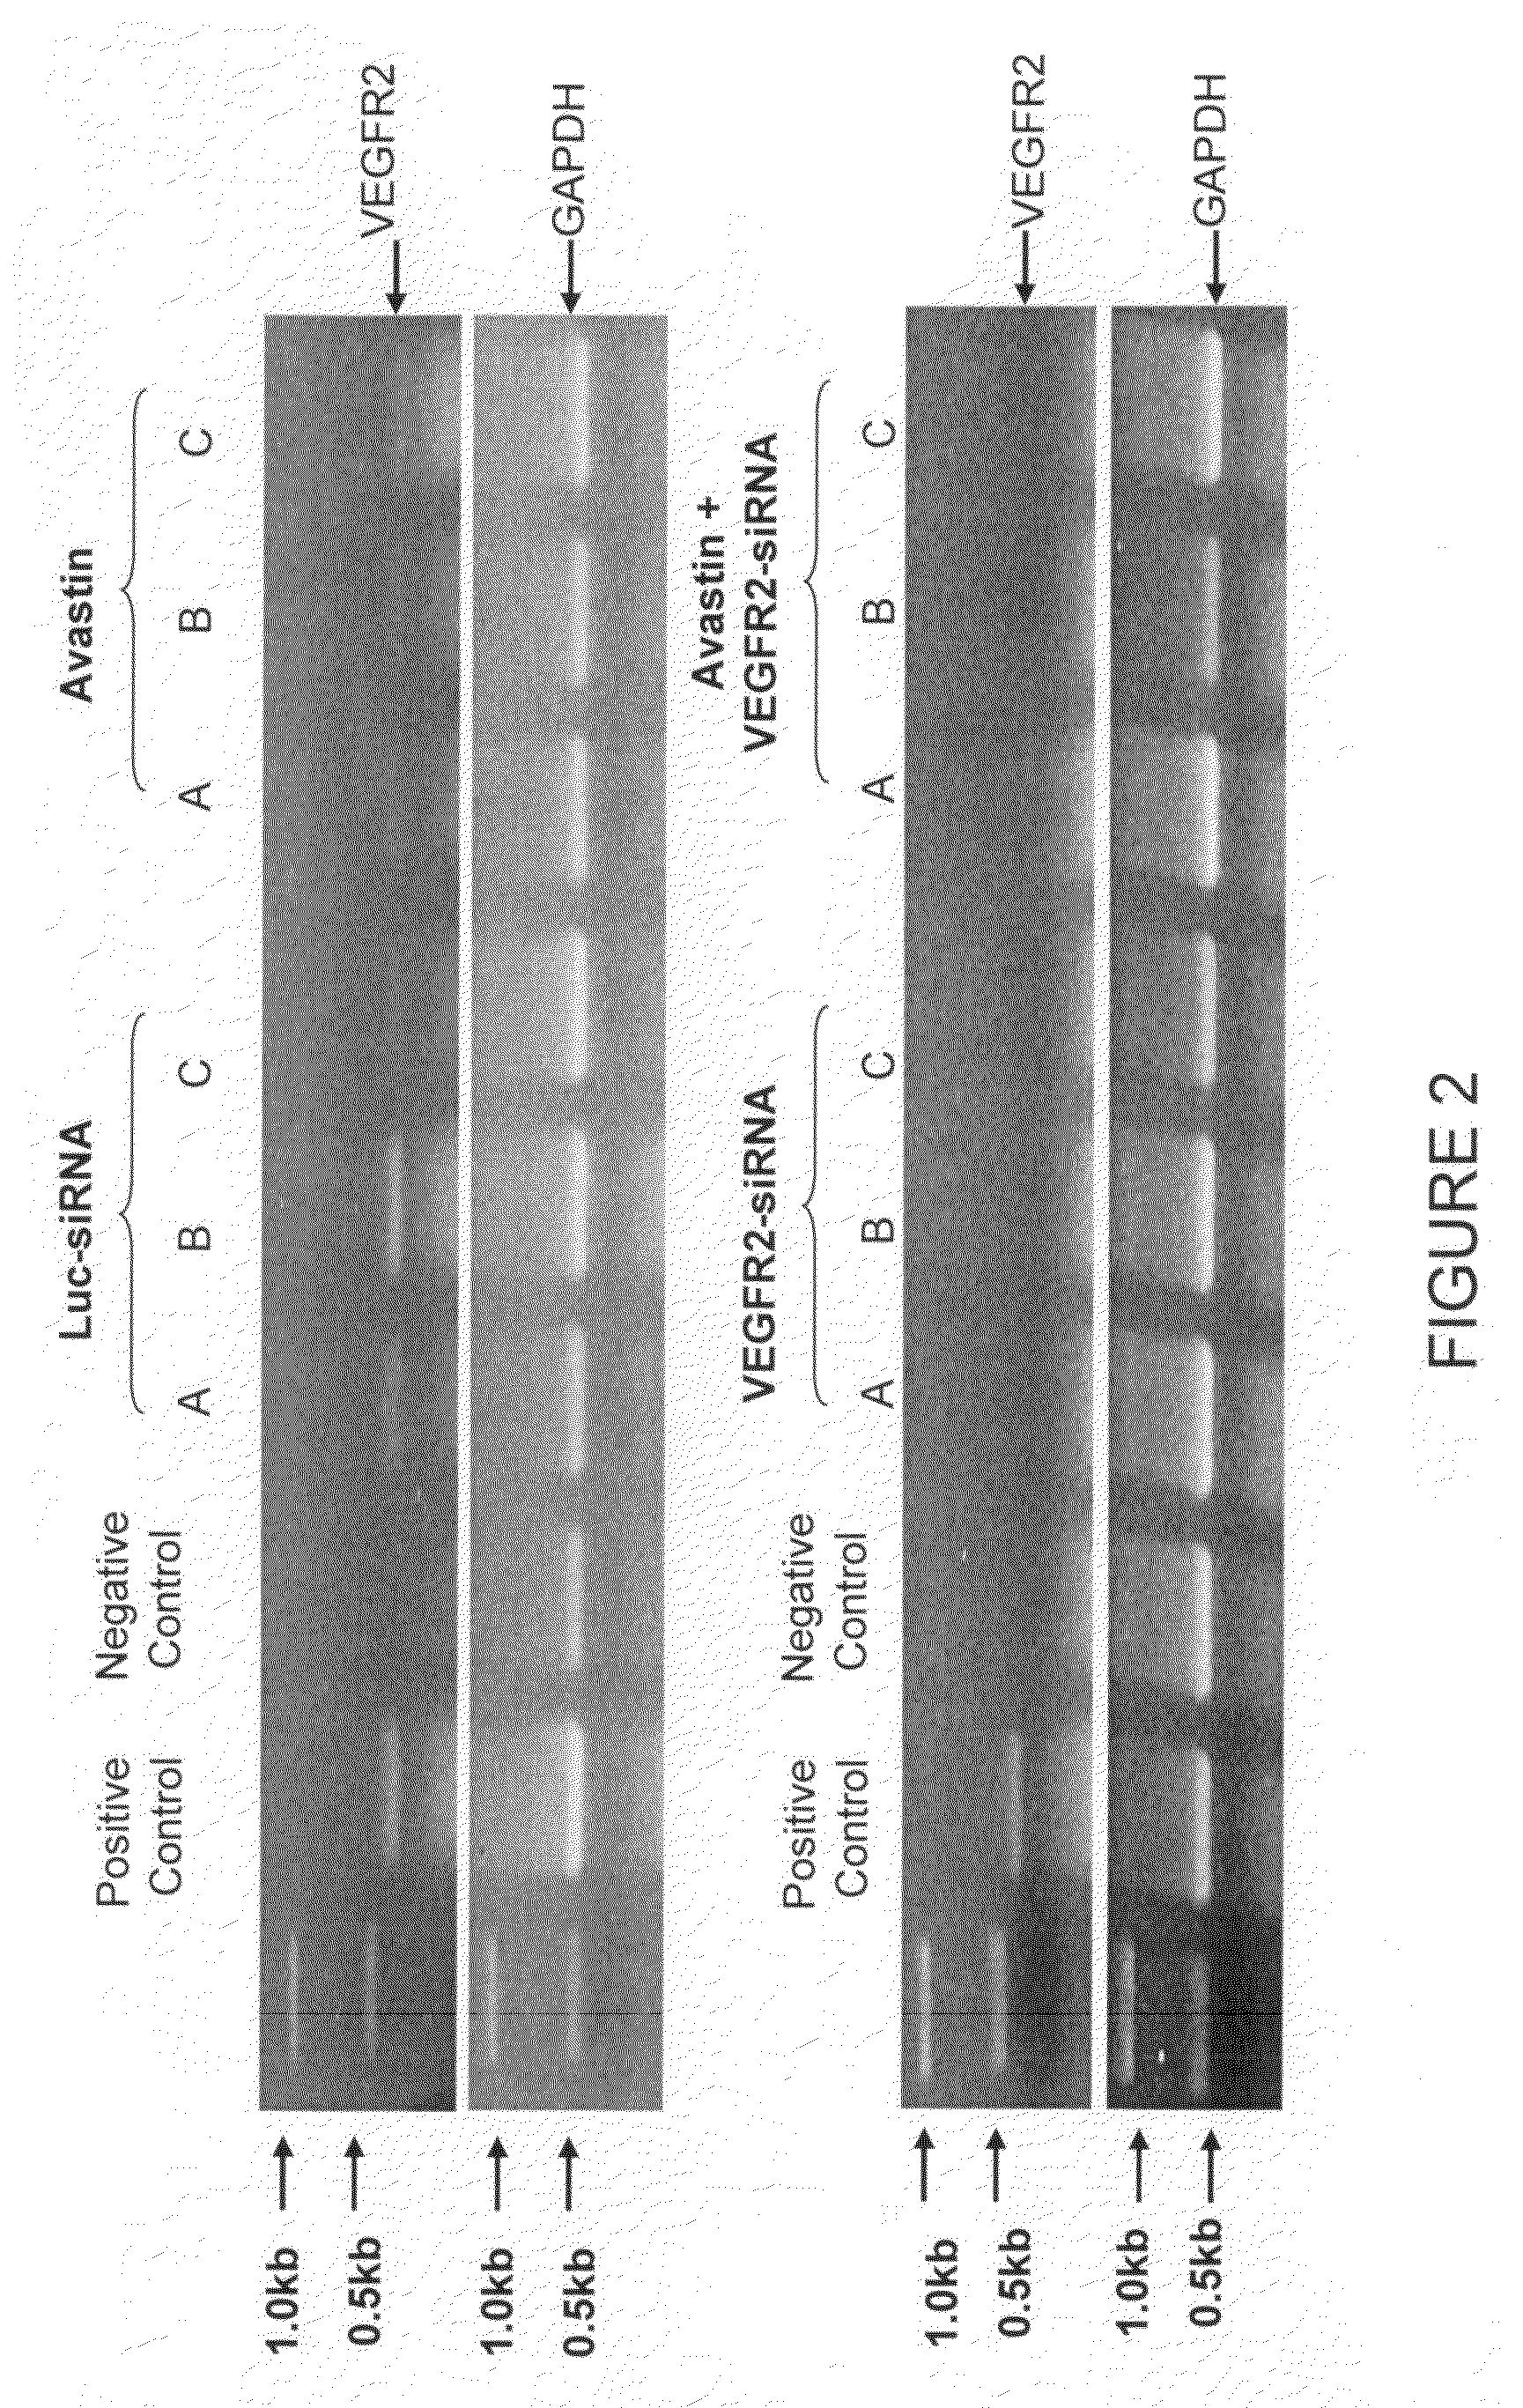 Composition and methods of RNAi therapeutics for treatment of cancer and other neovascularization diseases